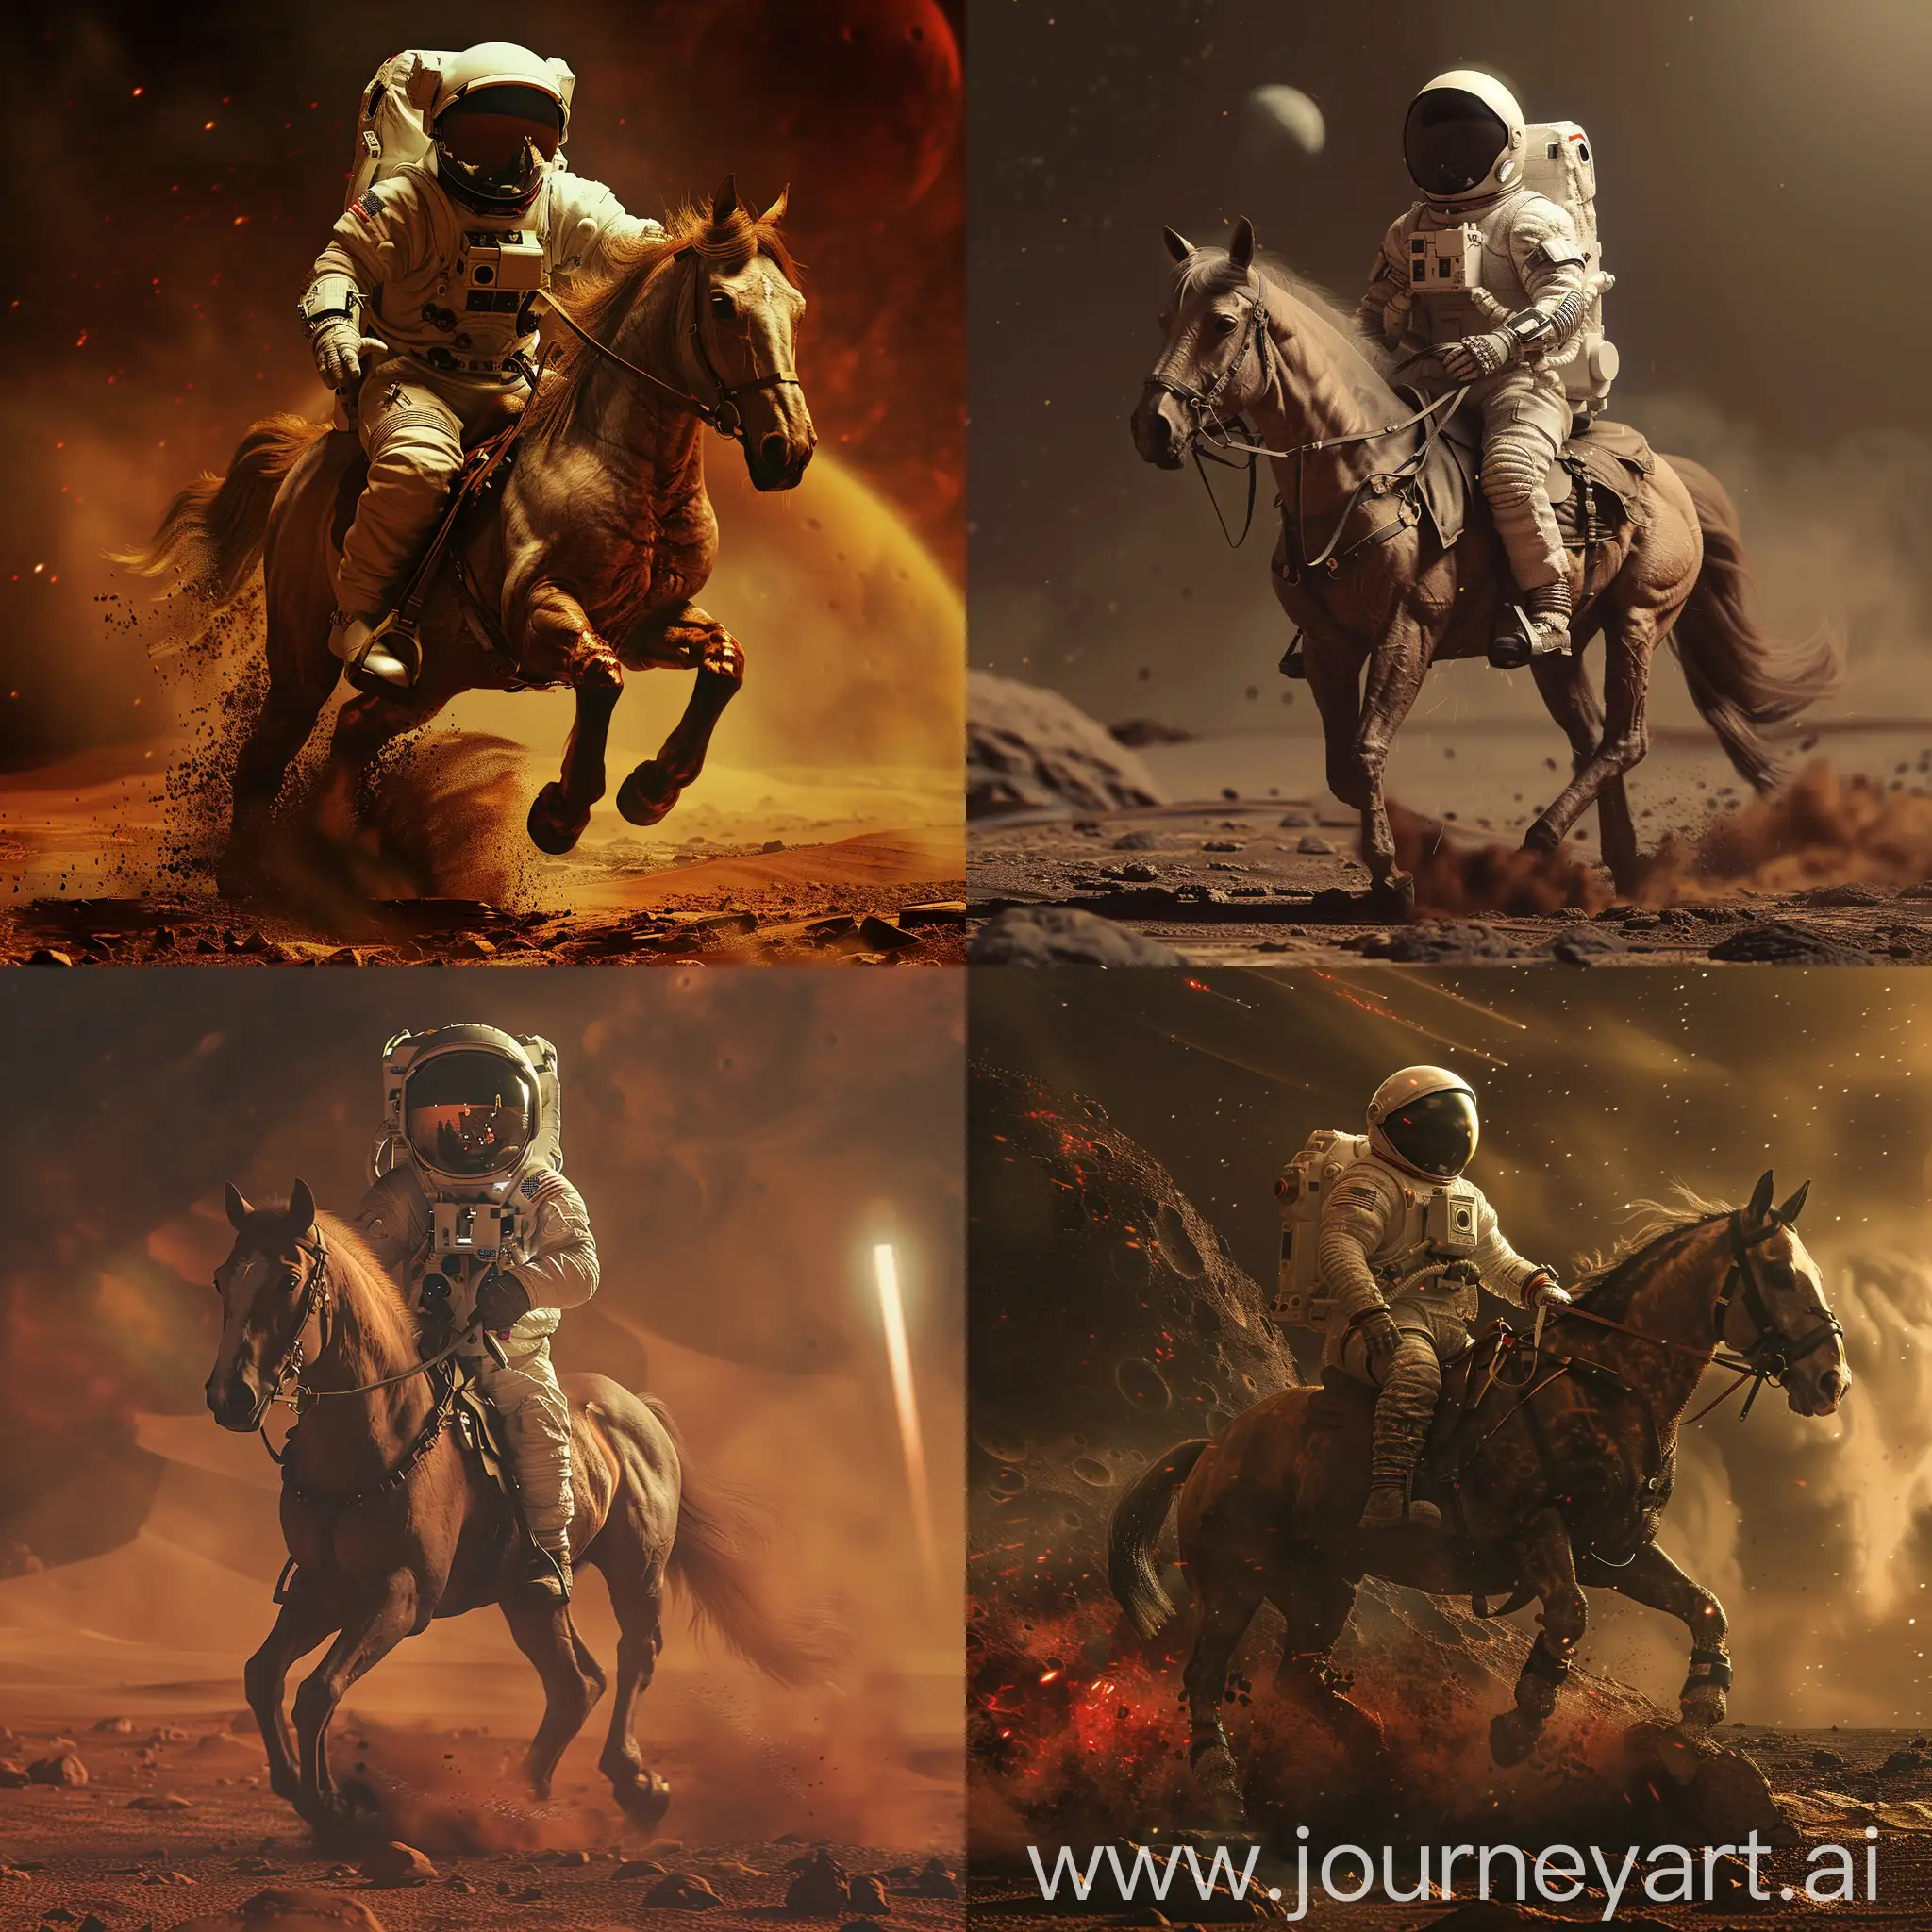 Astronaut-Riding-Horse-on-Mars-HD-Image-with-Dramatic-Lighting-and-Detailed-Features